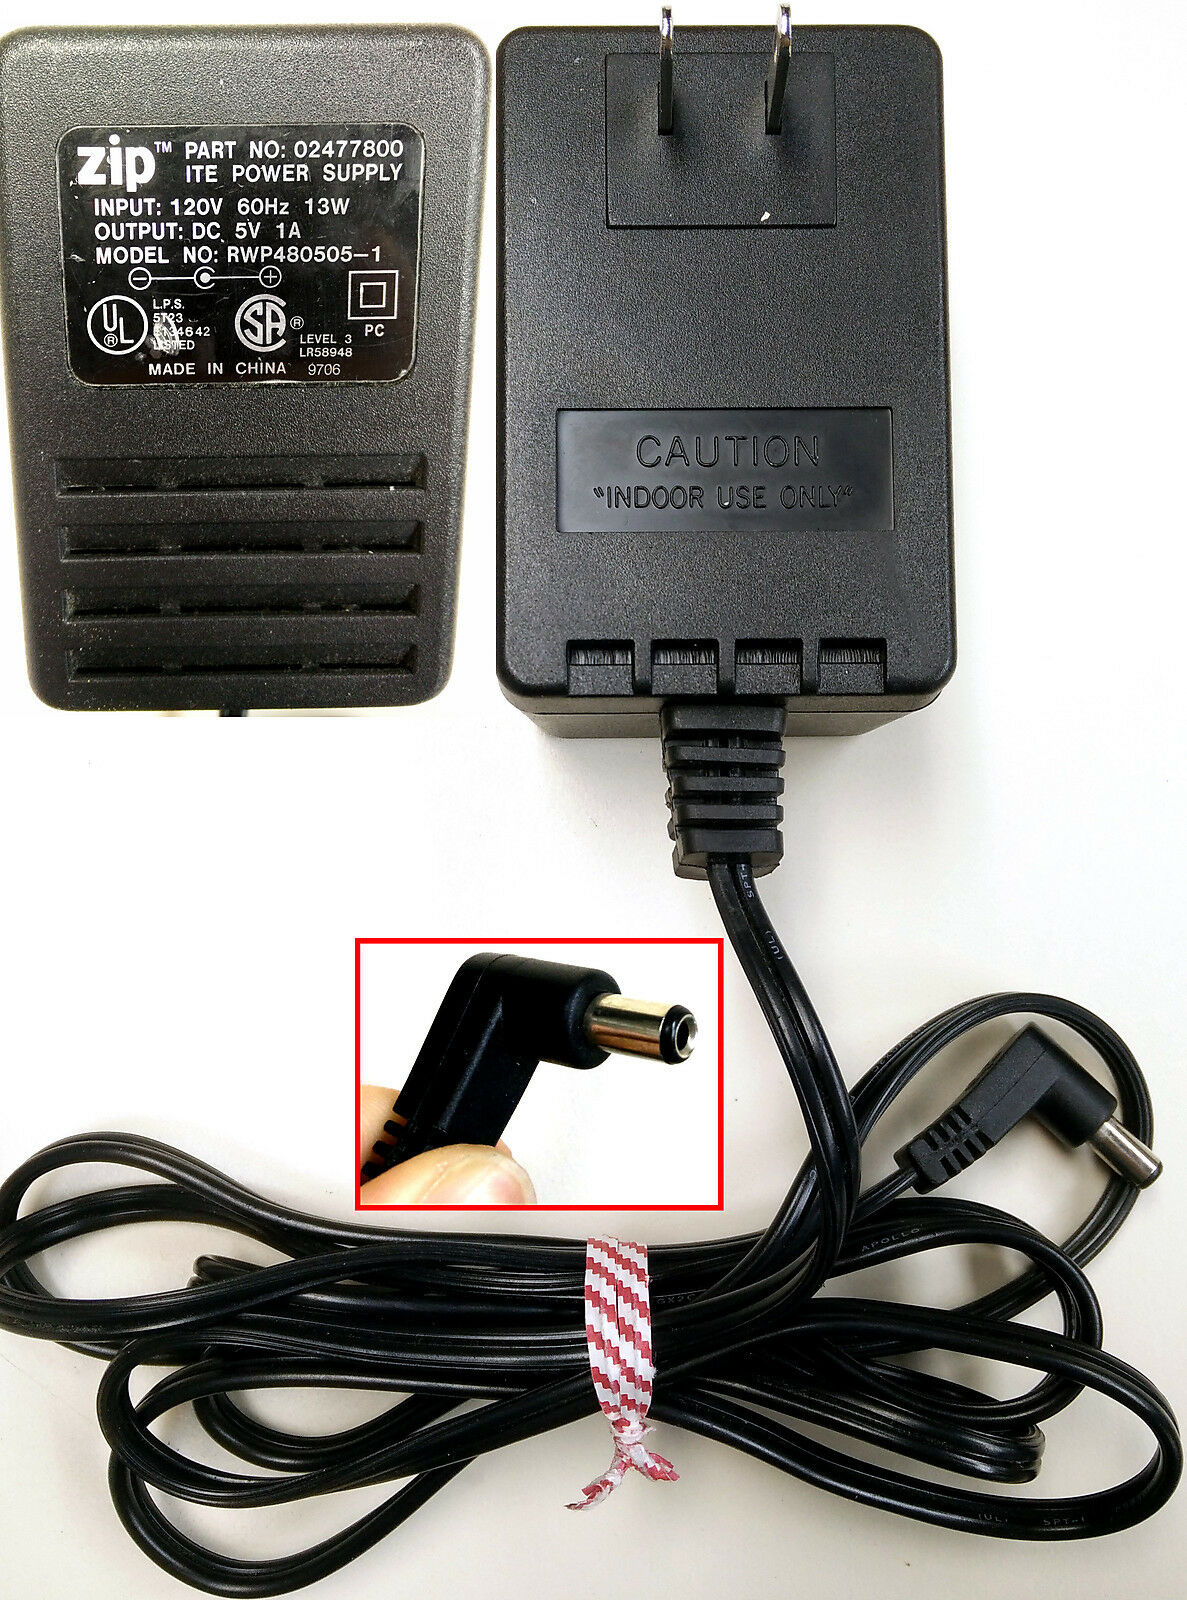 NEW Iomega Zip Drive 02477800 5V 1A AC DC Adapter RWP480505-1 ITE Power Supply